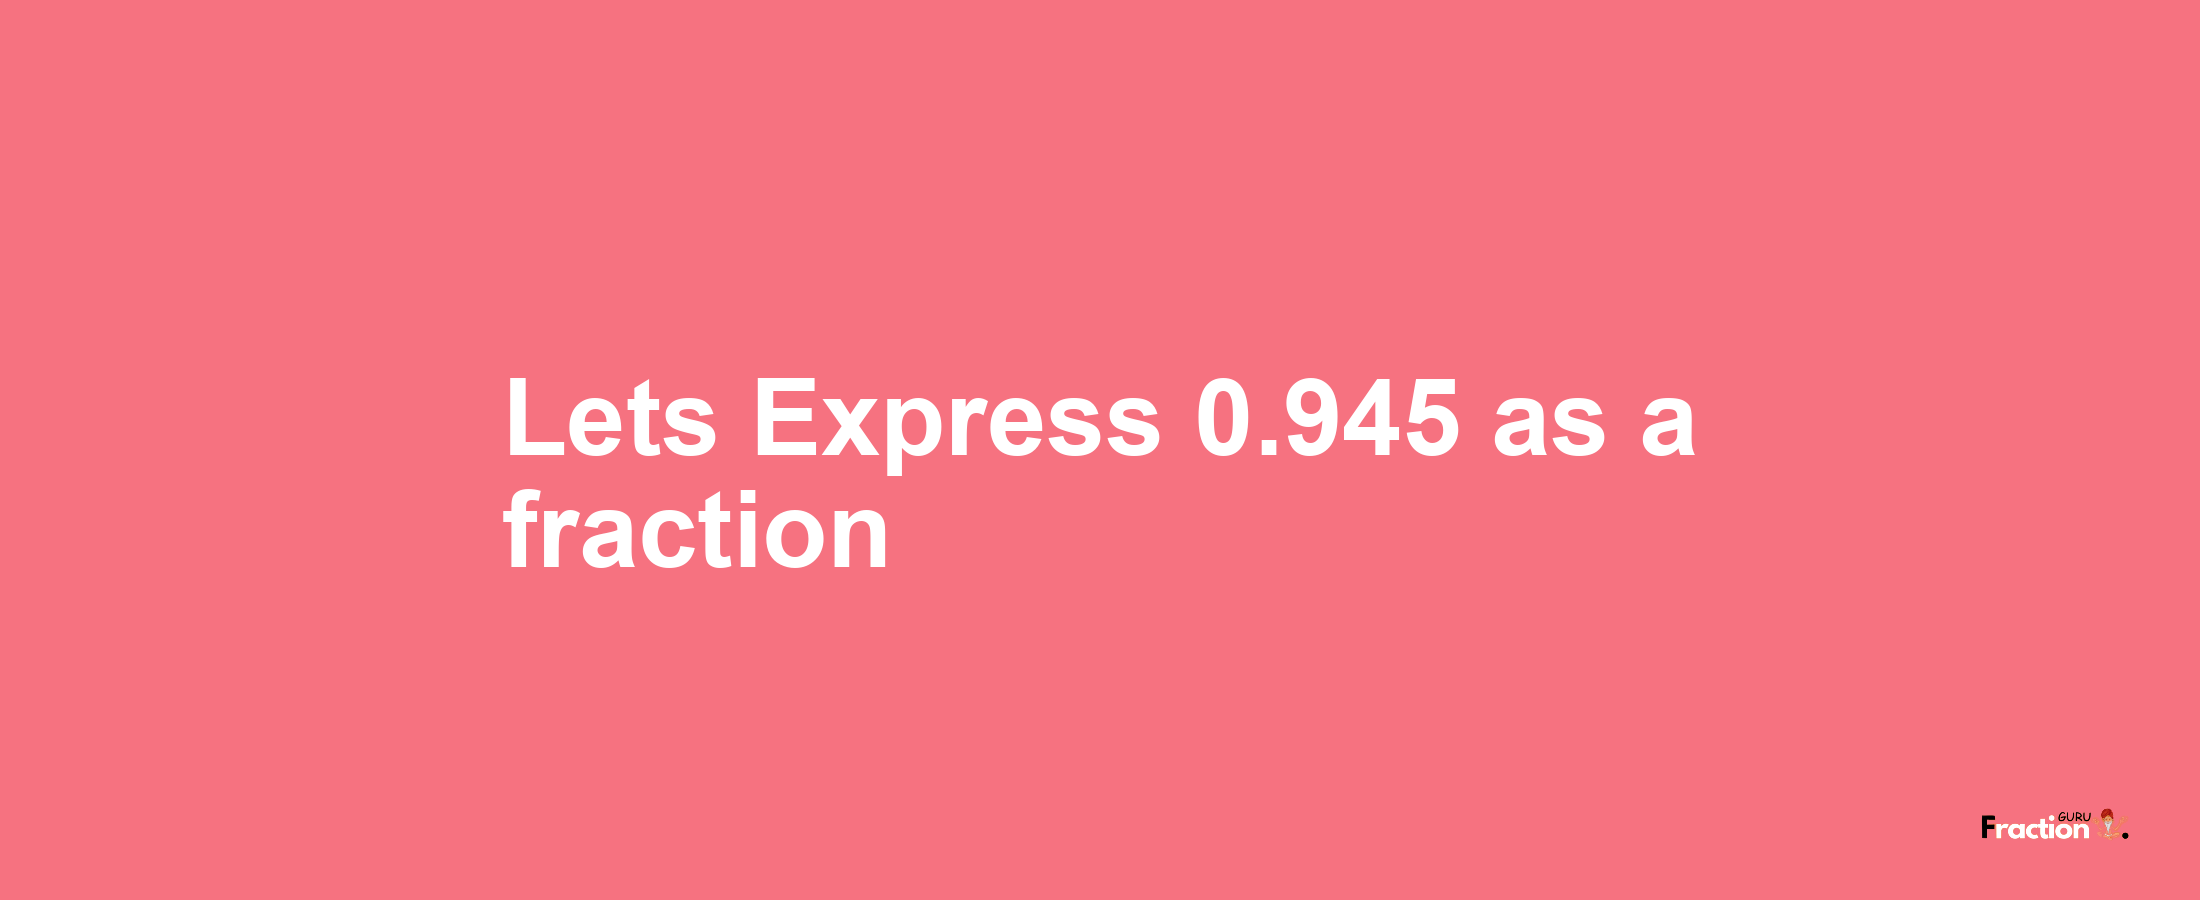 Lets Express 0.945 as afraction